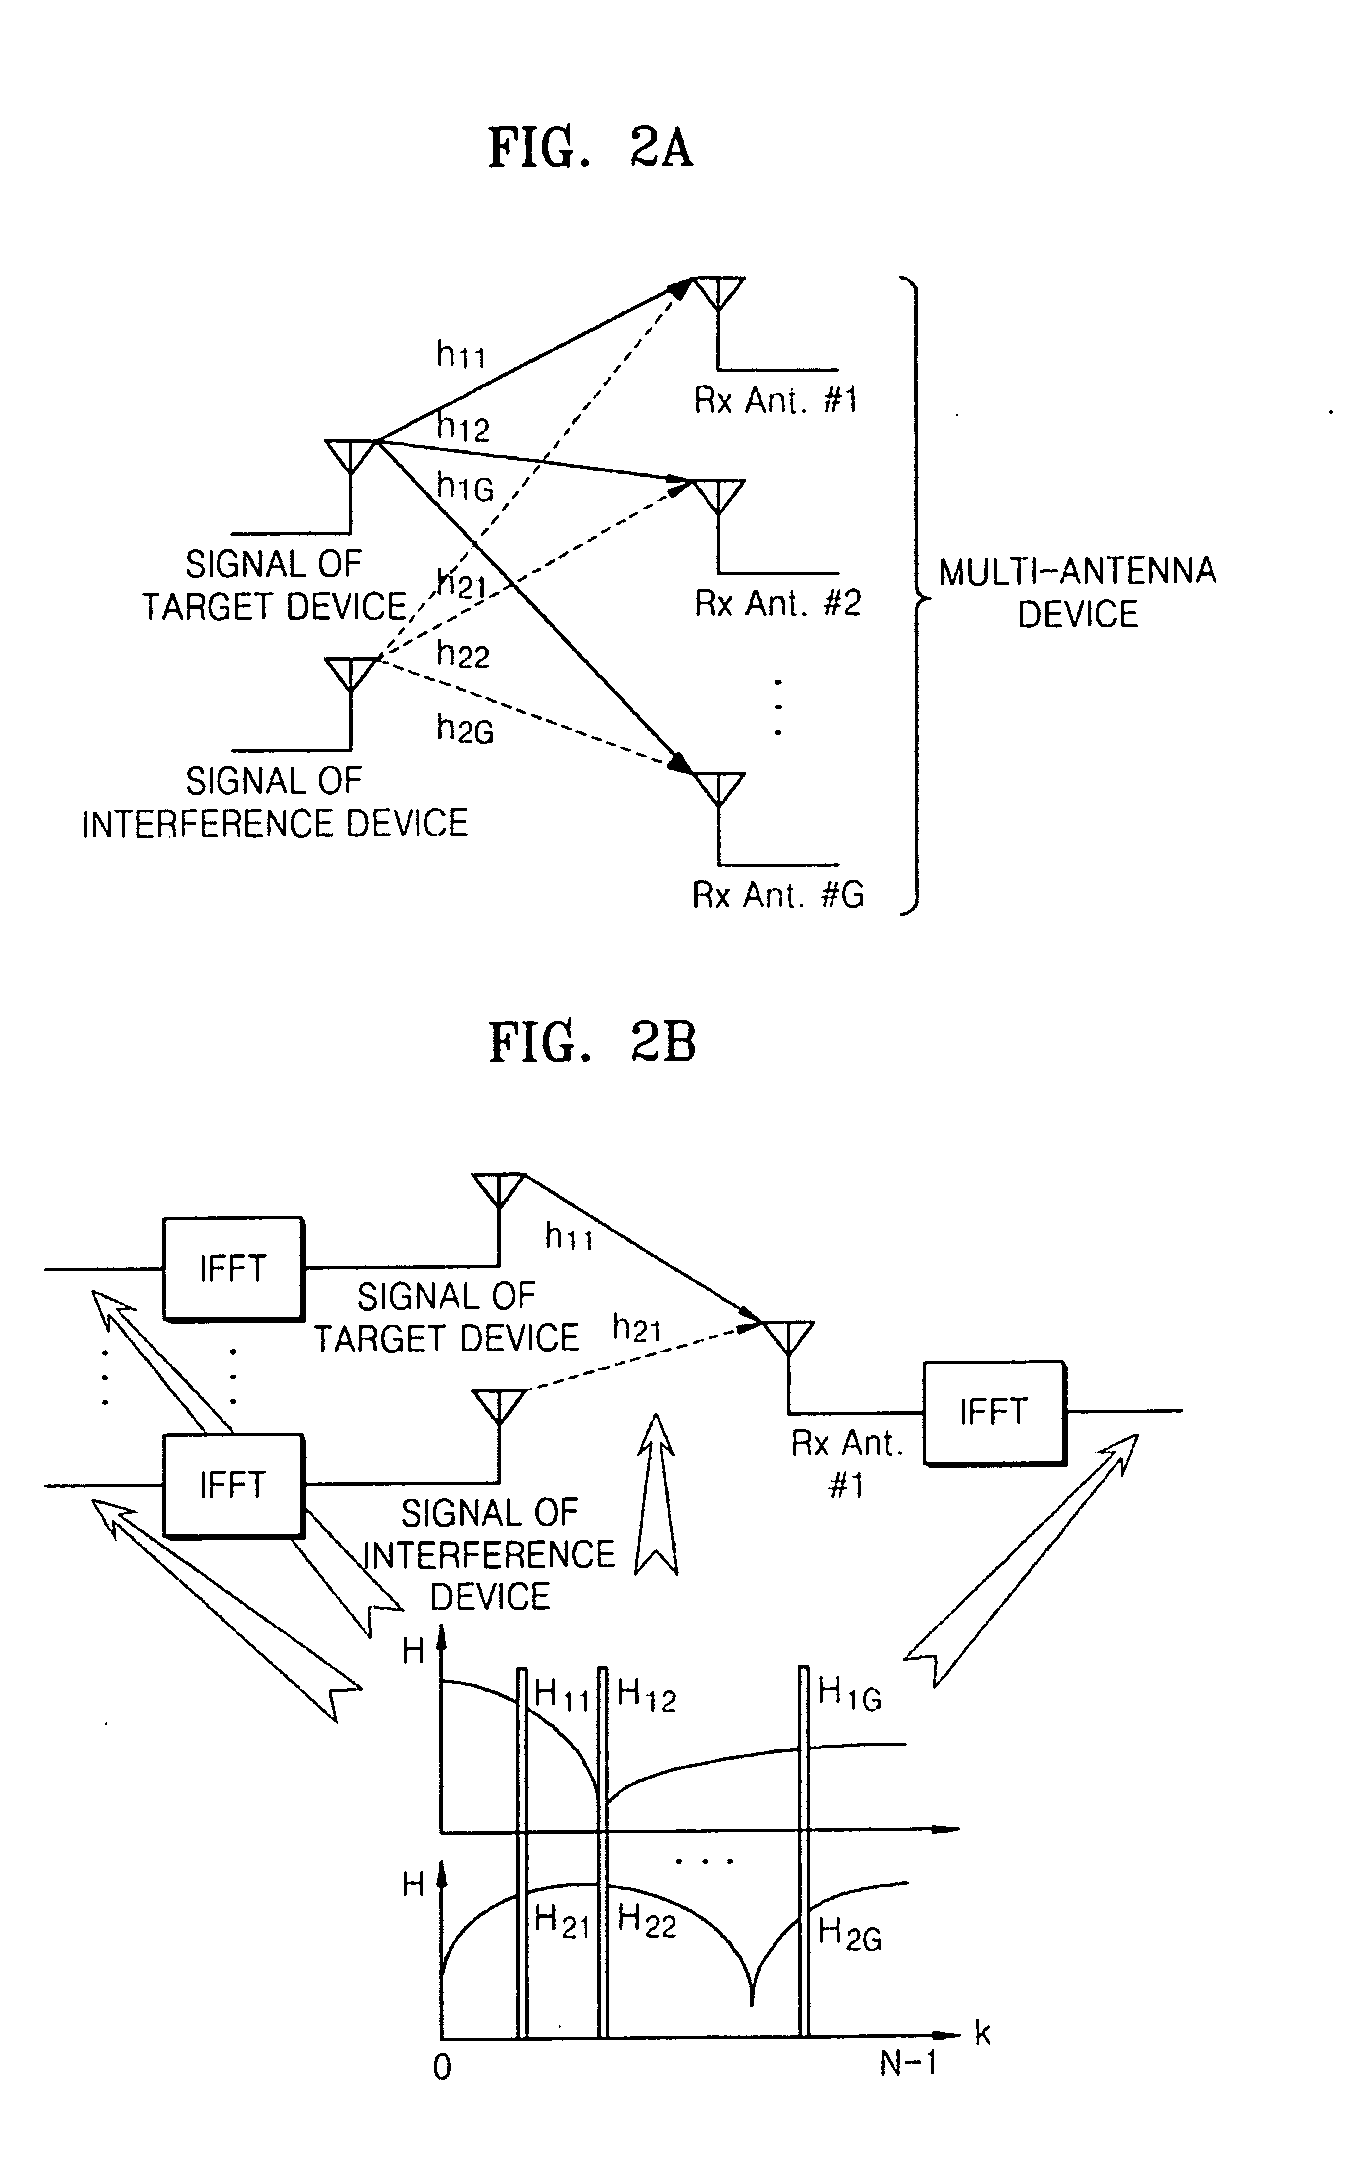 Virtual multi-antenna method for OFDM system and OFDM-based cellular system